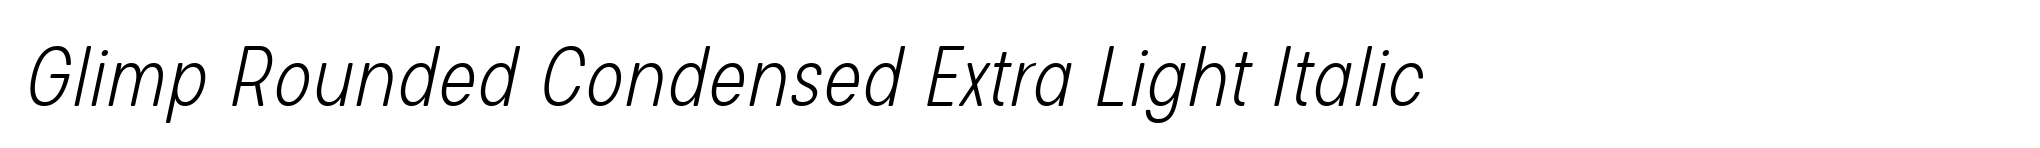 Glimp Rounded Condensed Extra Light Italic image